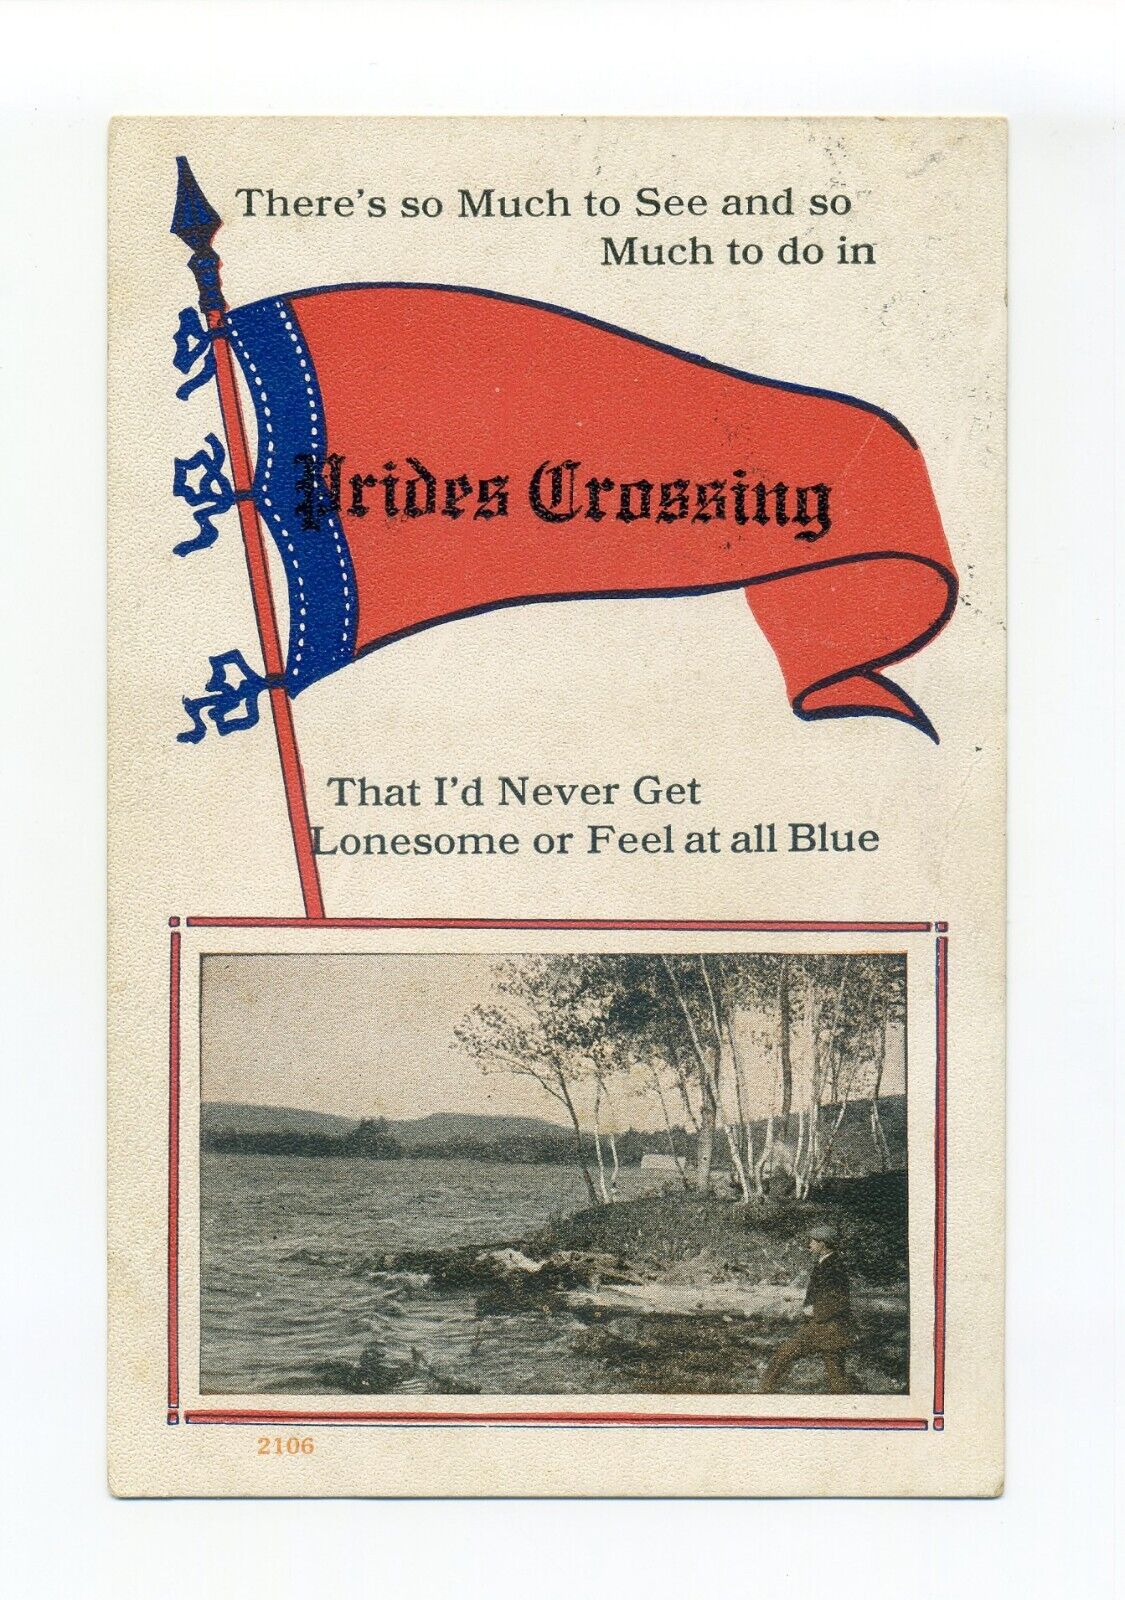 Prides Crossing, Beverly MA 1917 pennant postcard, so much to see and do